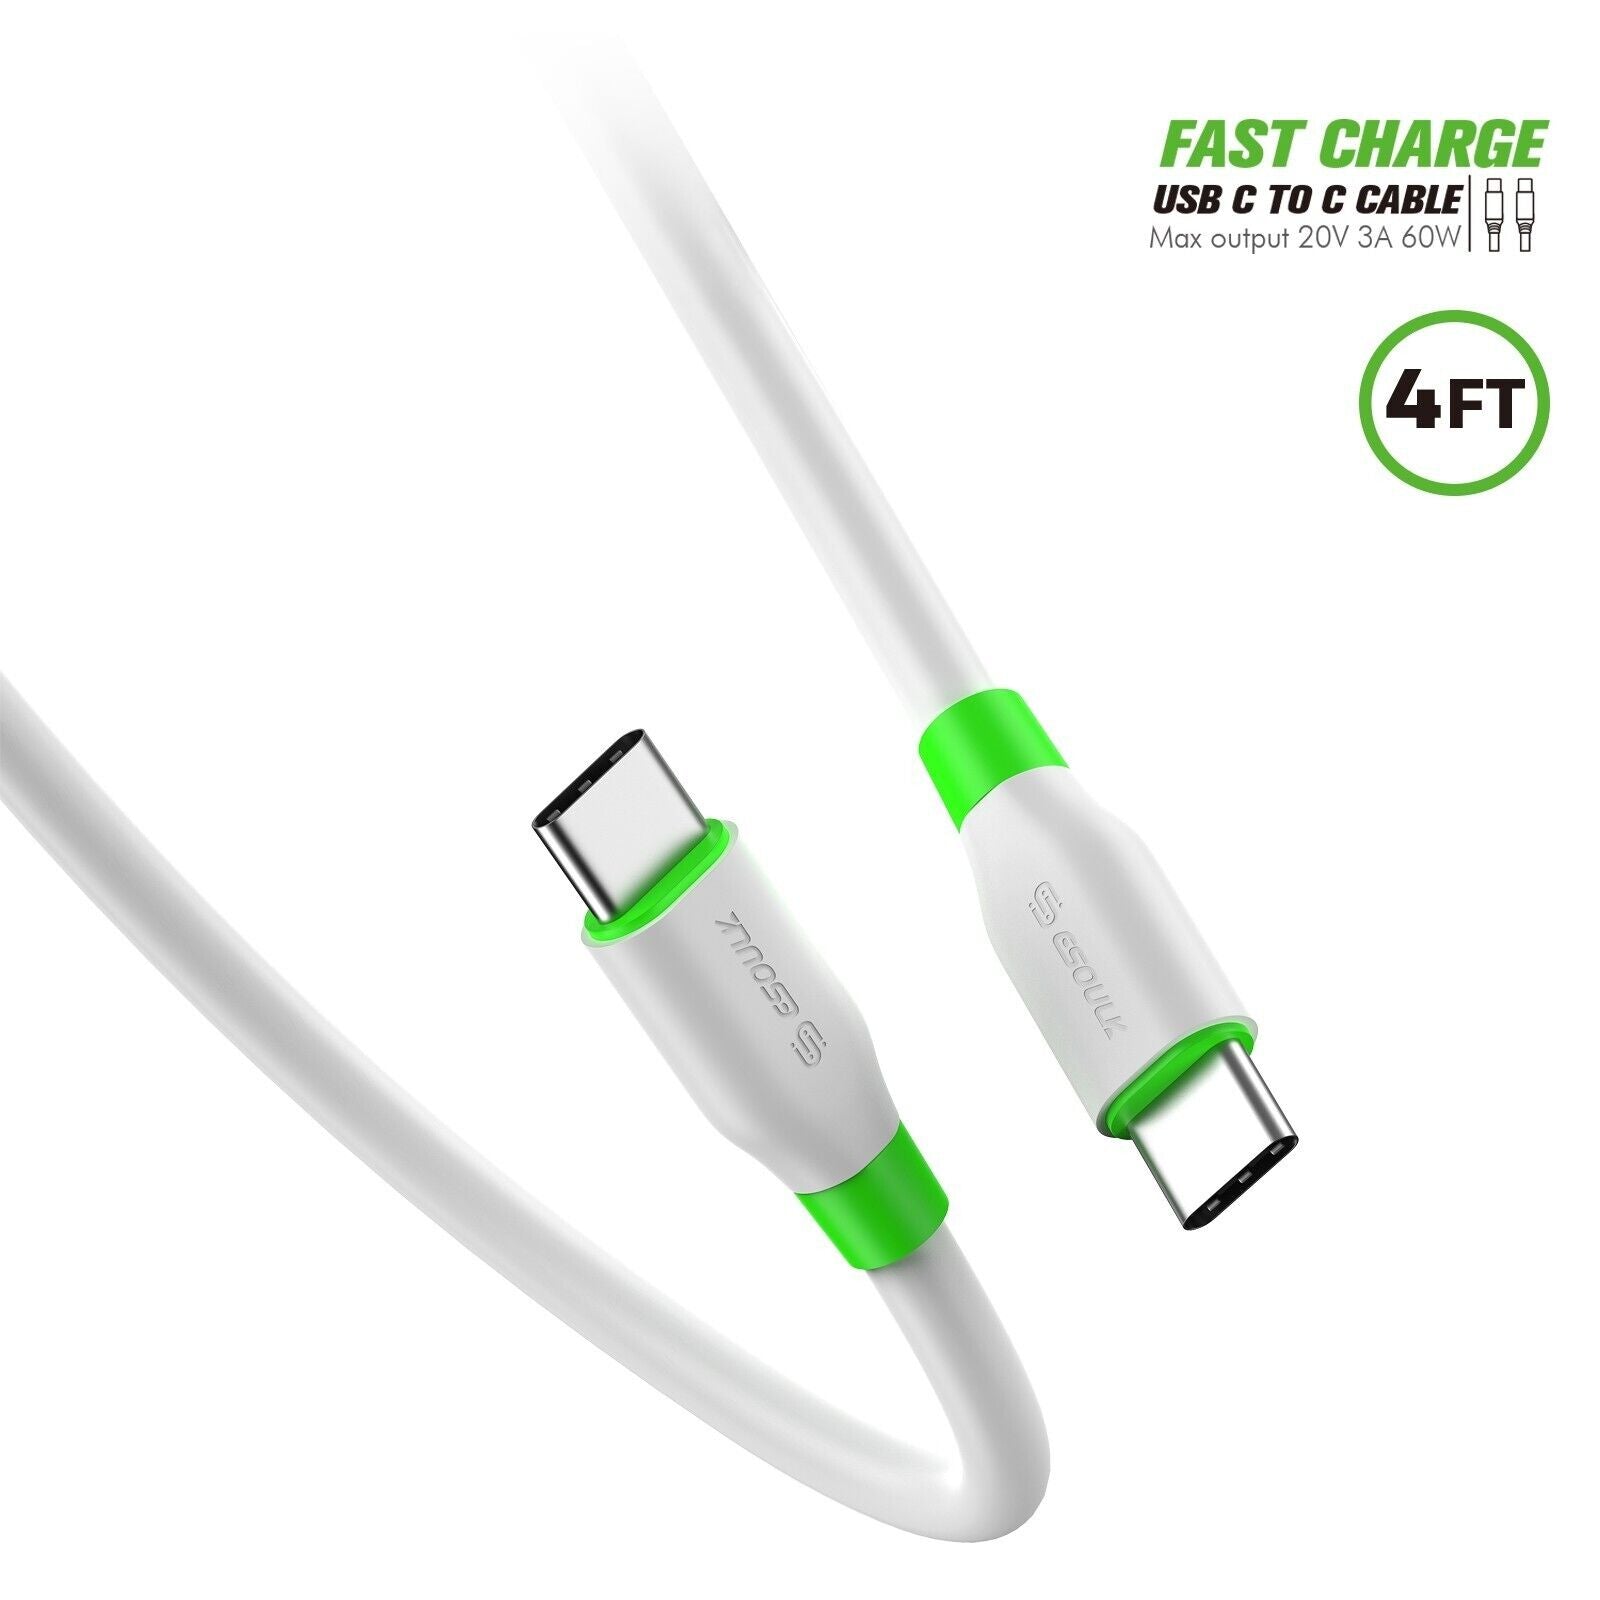 ESOULK USB C To C Fast Charge Cable 4FT - Virbu Mobile